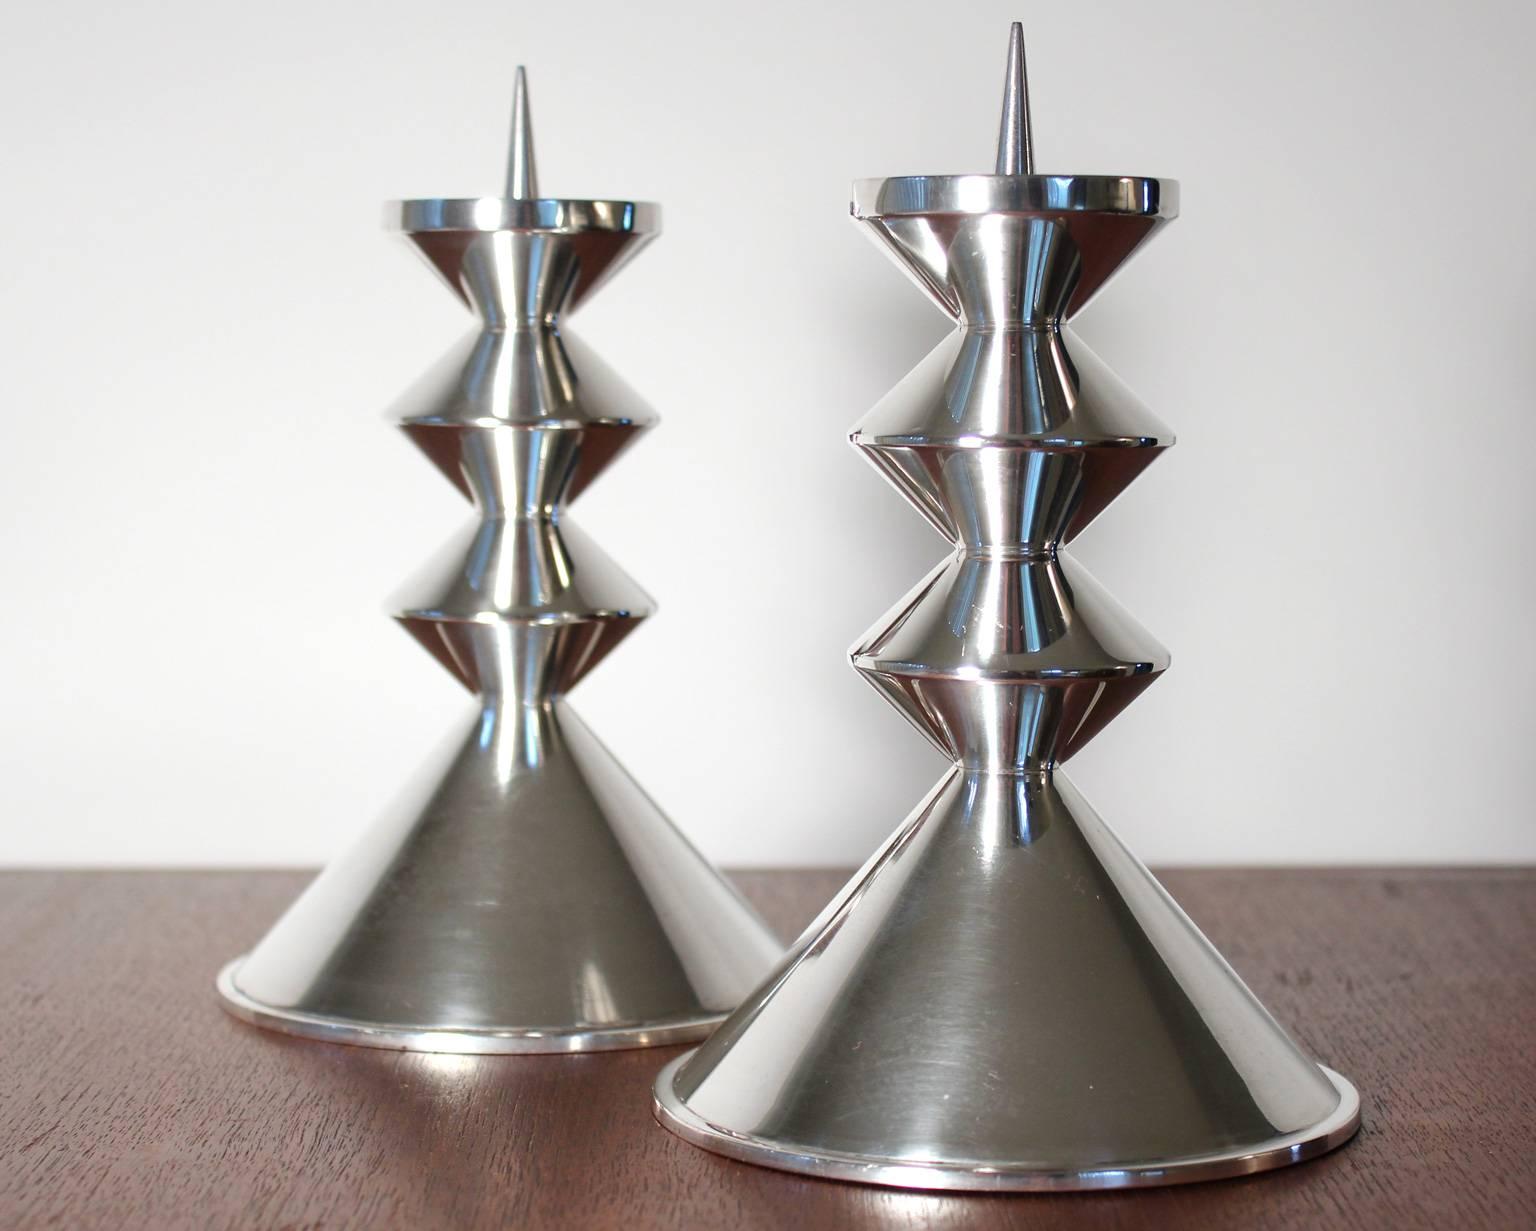 Pair of minimalist mid century modern sterling silver candleholders made in London, England, 1964. Hallmarks as pictured. Each piece measuring 7